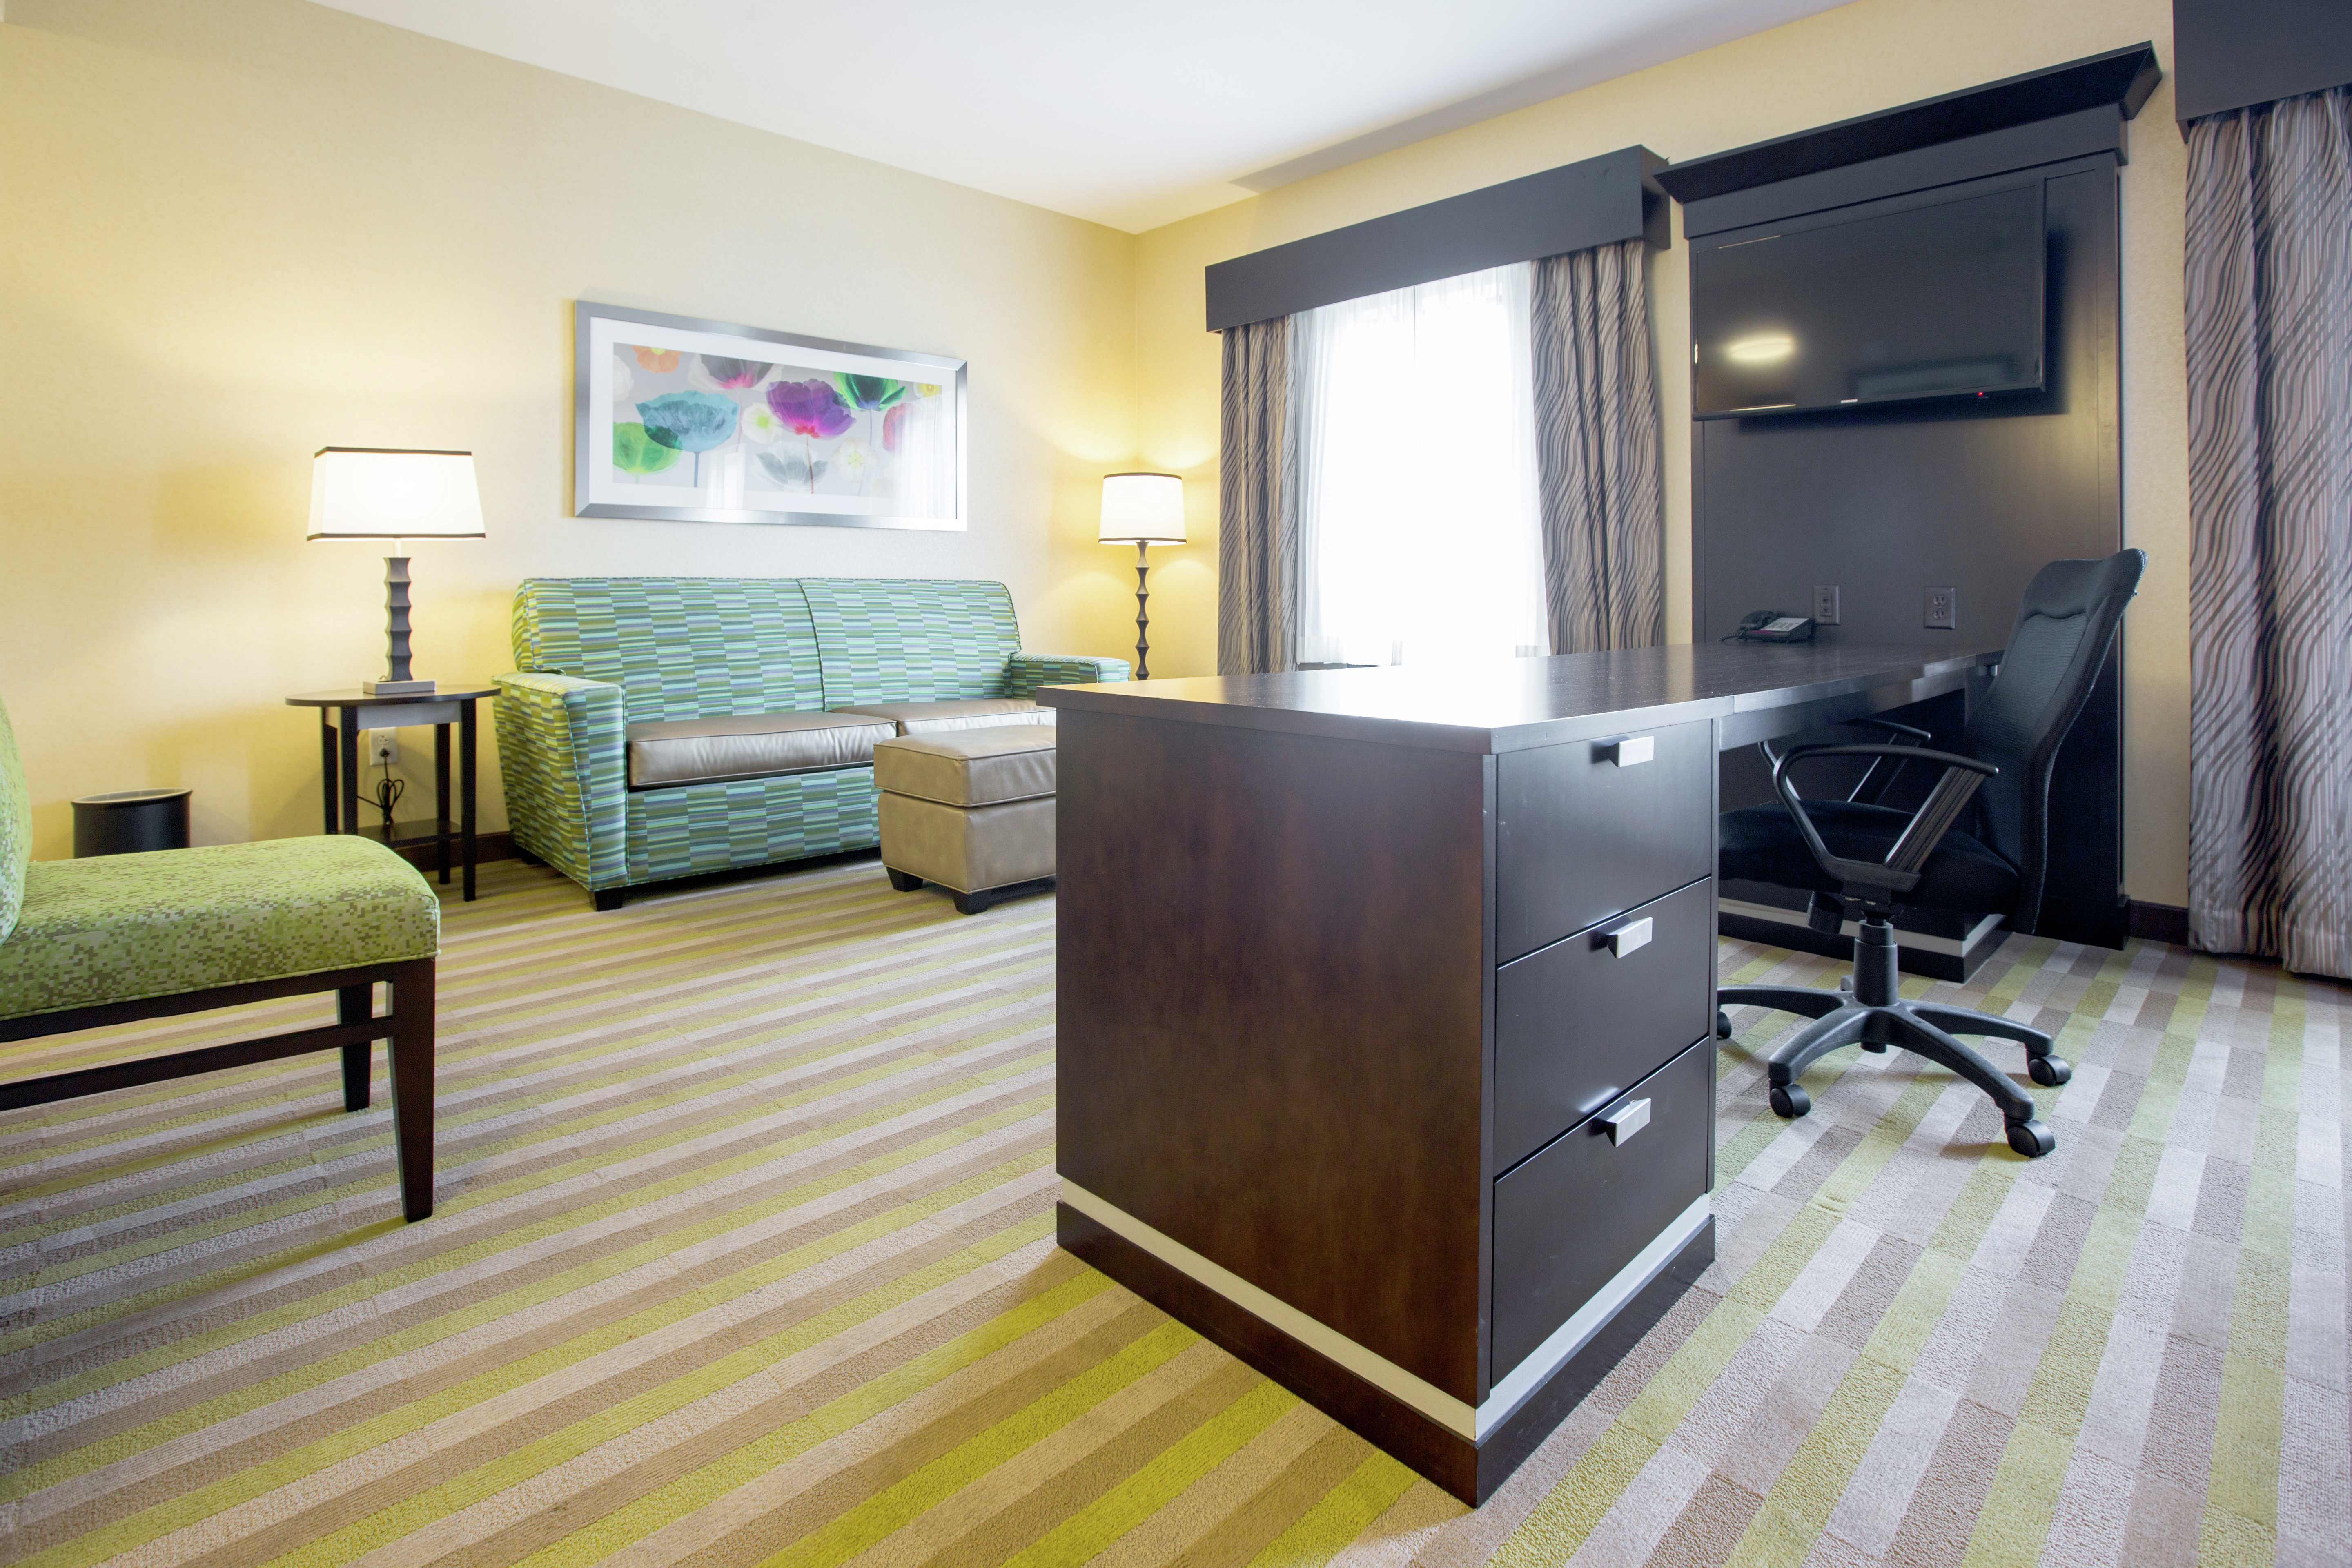 Work Desk, Flat Screen TV and Seating Area in a Hotel Suite